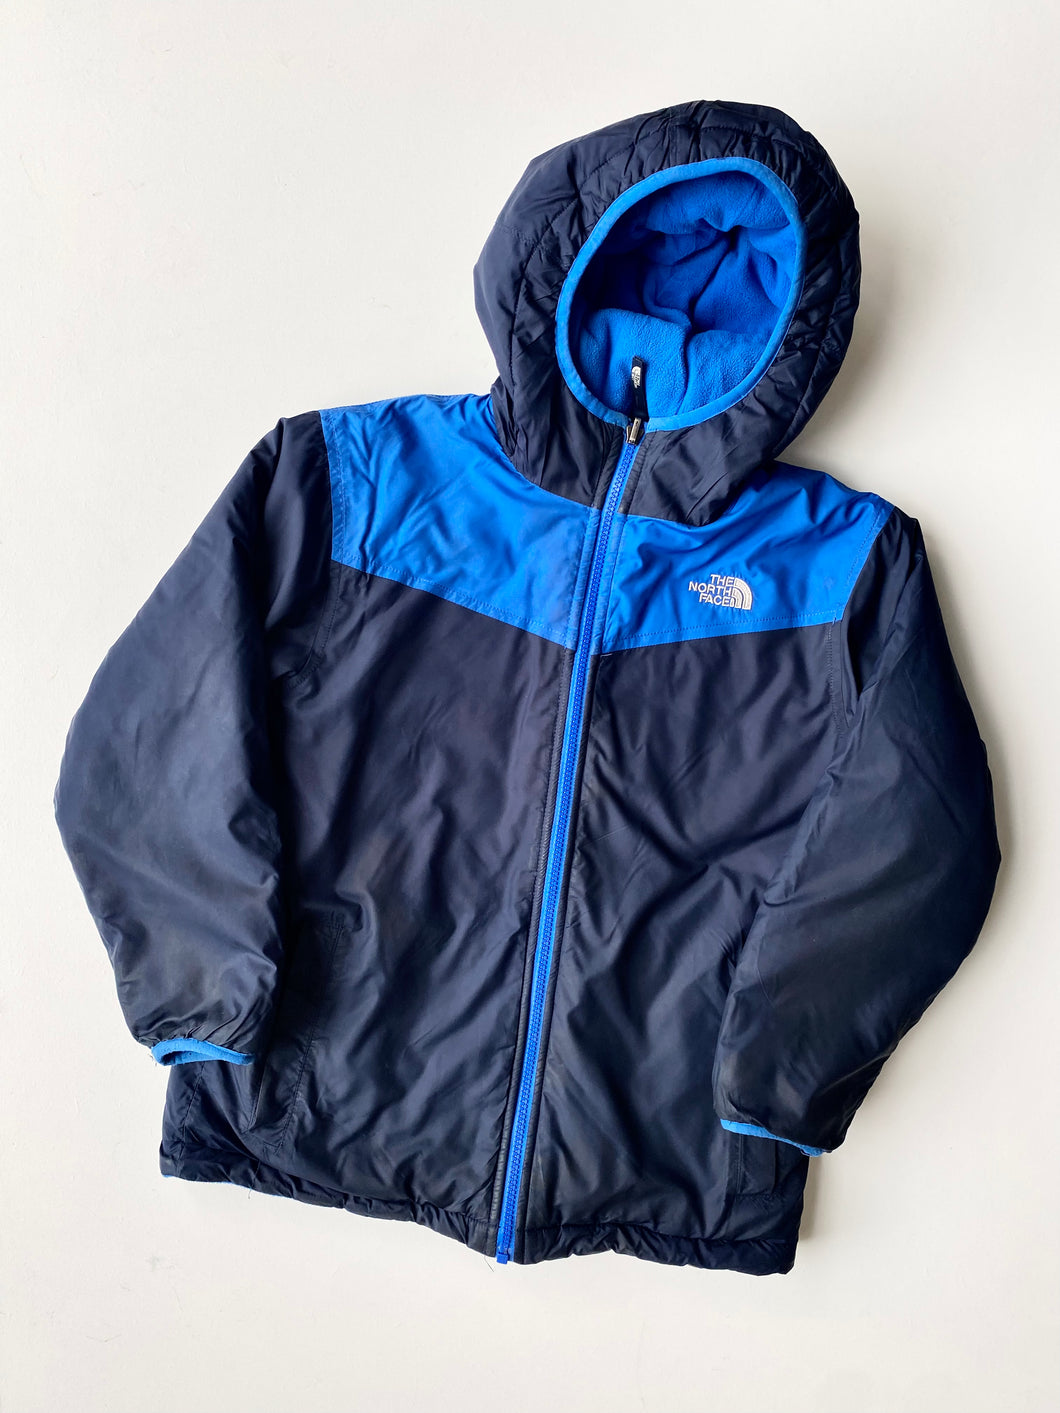 The North Face reversible coat (Age 10/12)